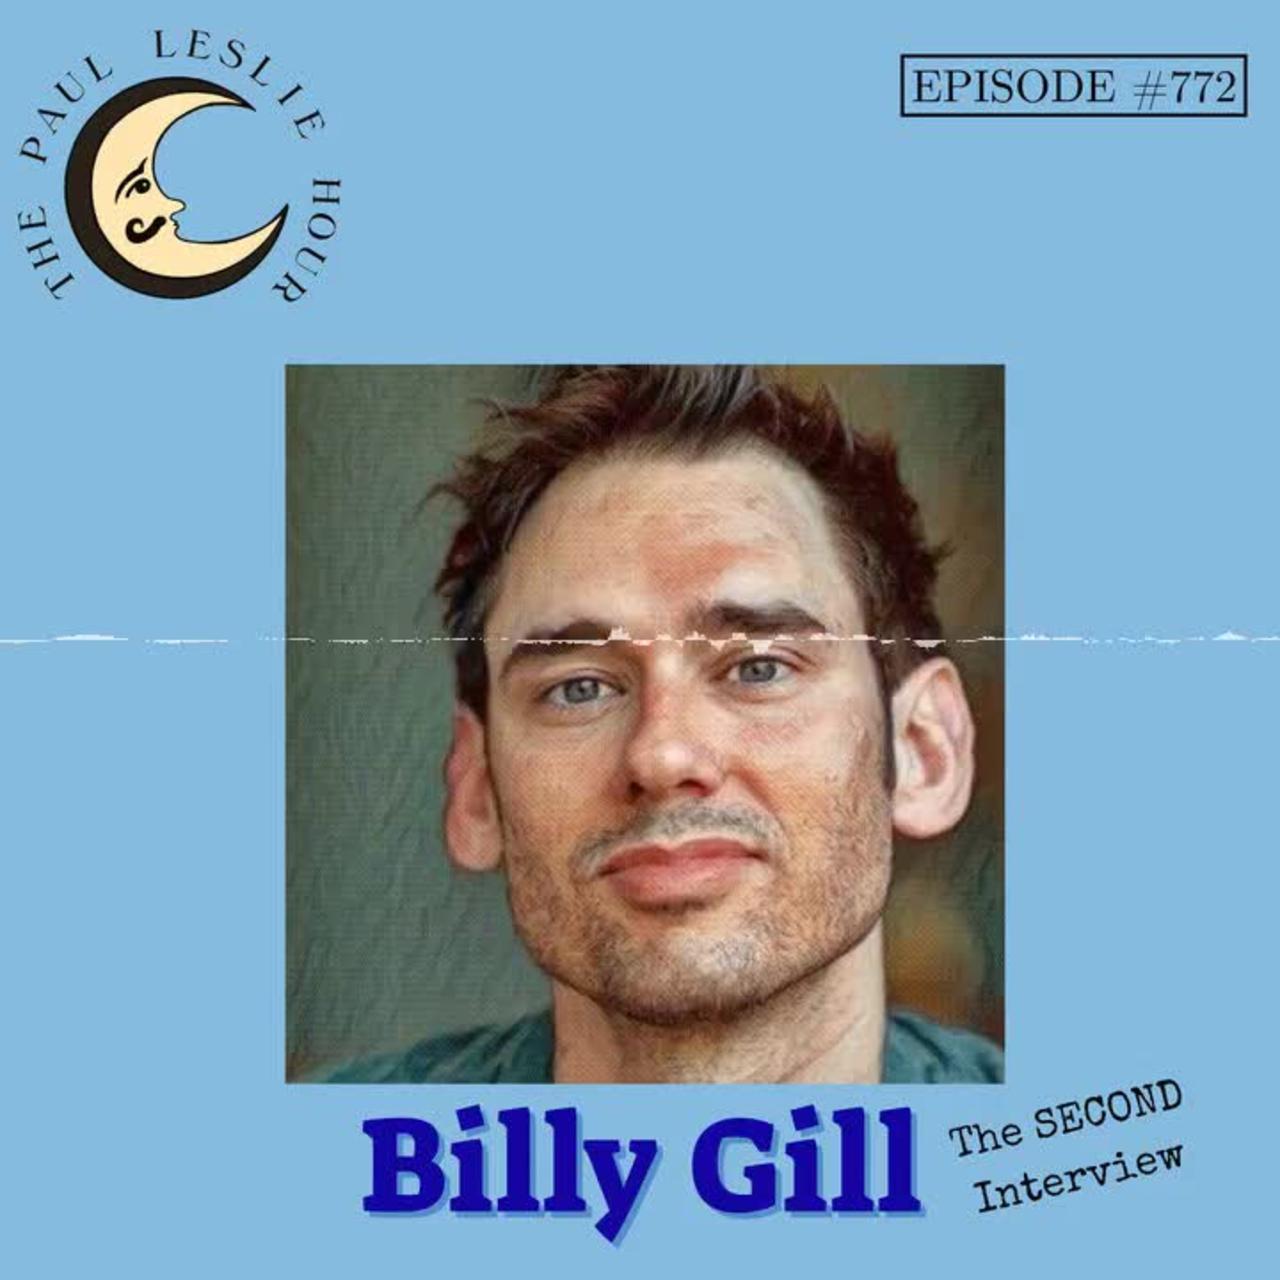 Billy Gill Returns Interview on The Paul Leslie Hour